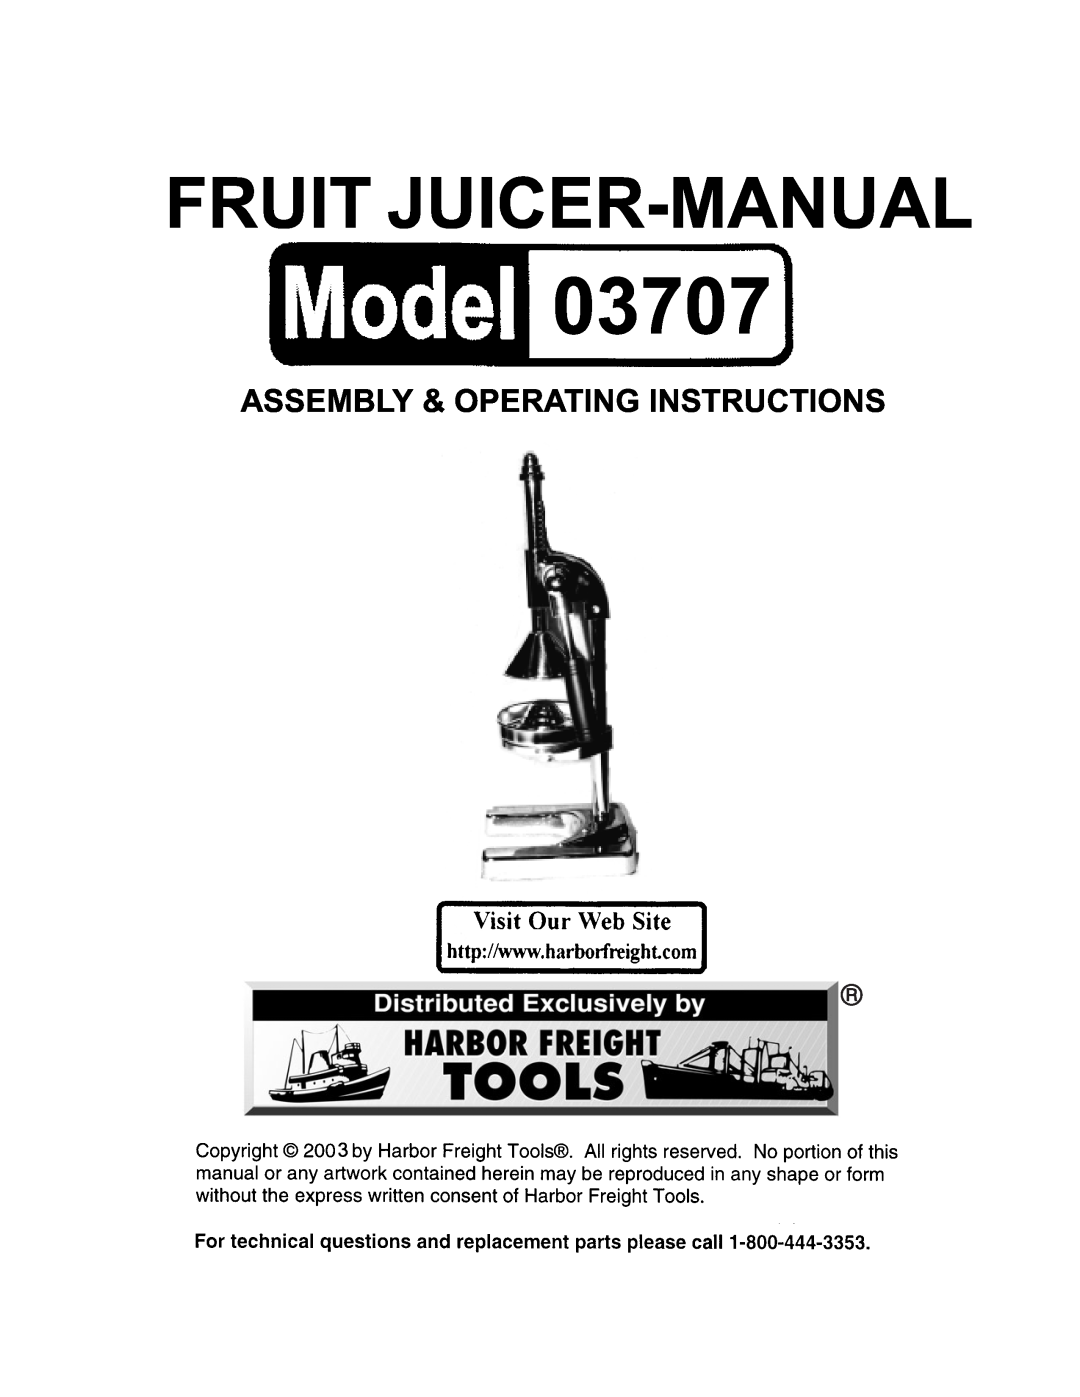 Harbor Freight Tools 03707 manual Fruit Juicer-Manual, Assembly & Operating Instructions 